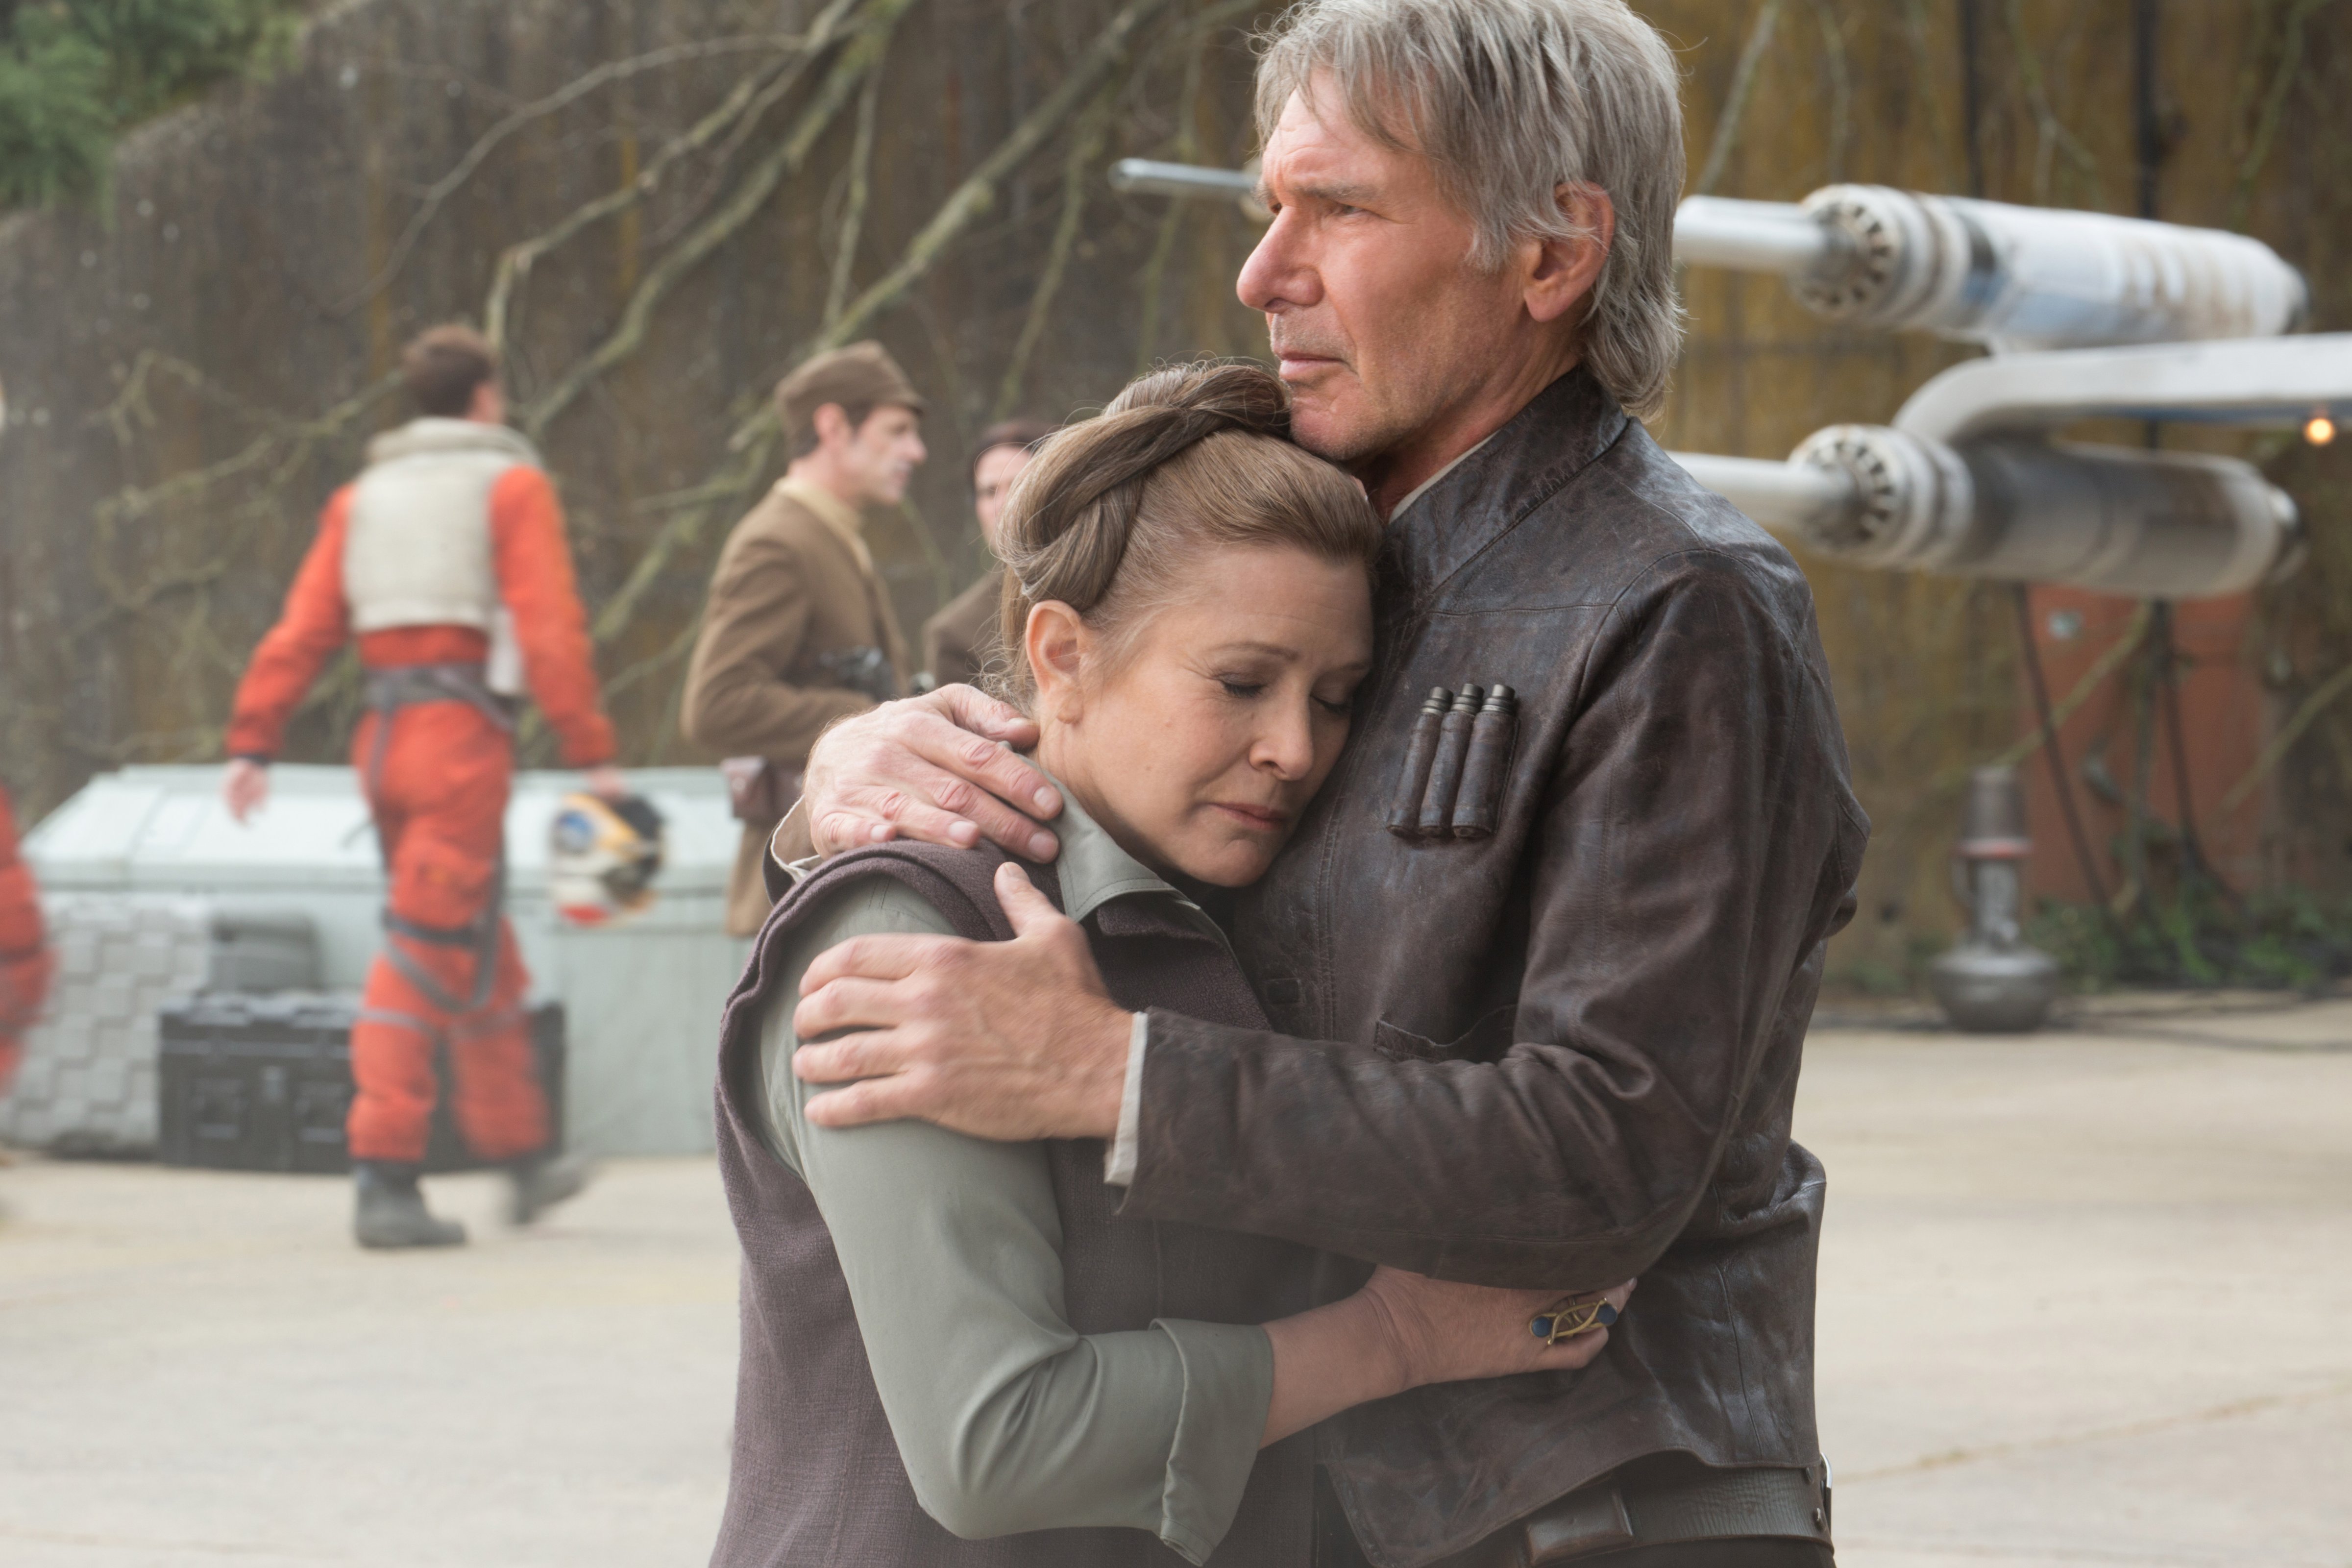 Harrison Ford as Han Solo and Carrie Fisher as General Leia Organa in <i>Star Wars: The Force Awakens</i>. (Lucasfilm Ltd.)